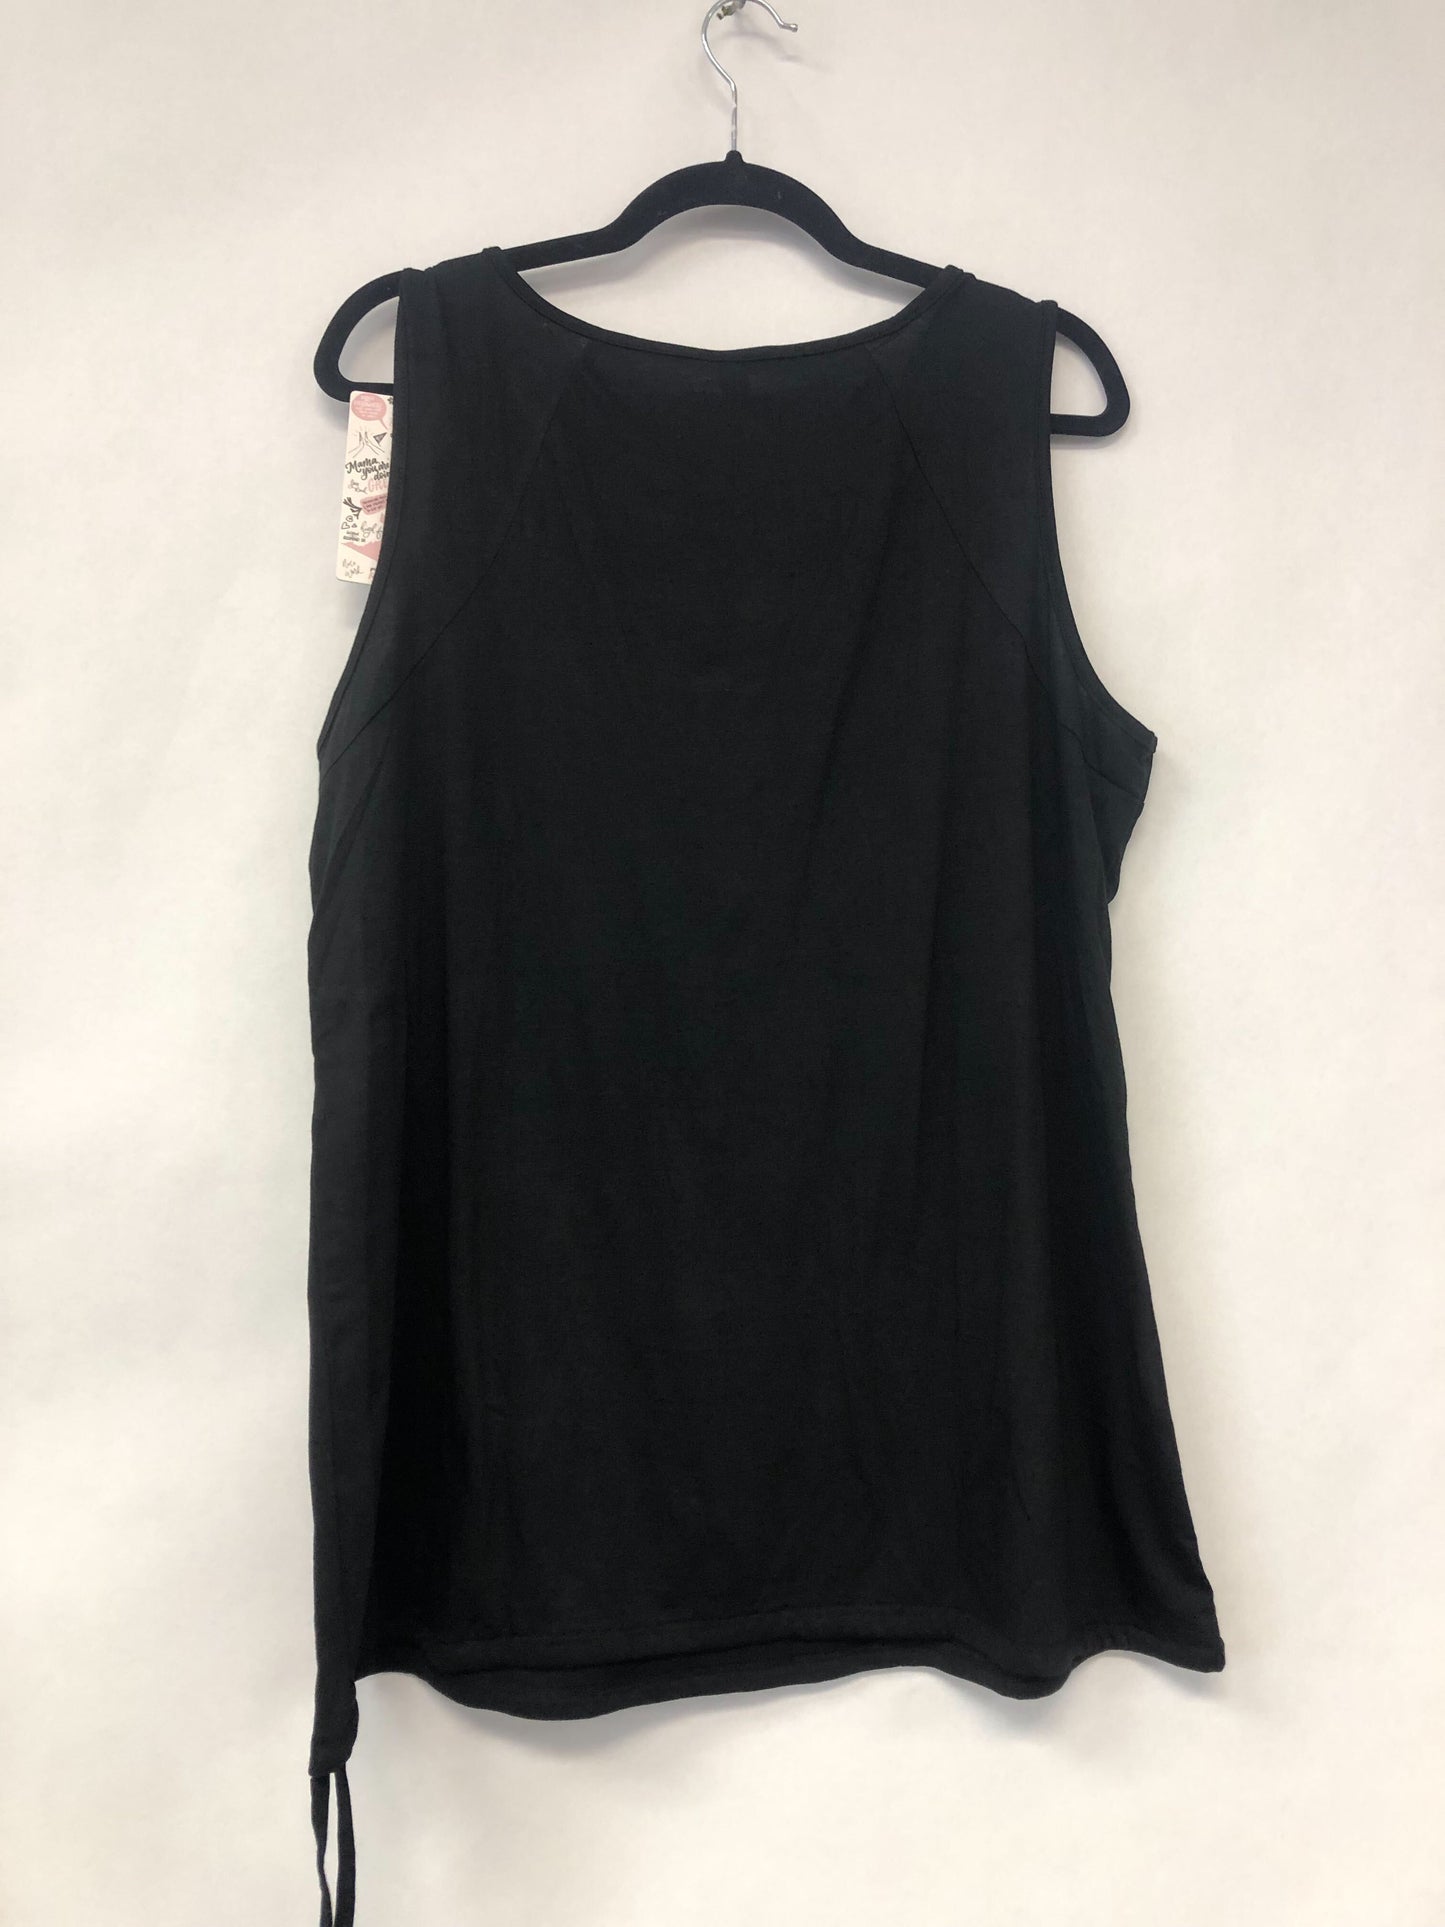 Outlet 6248 - Latched Mama Active Nursing Tank - Black - 1X